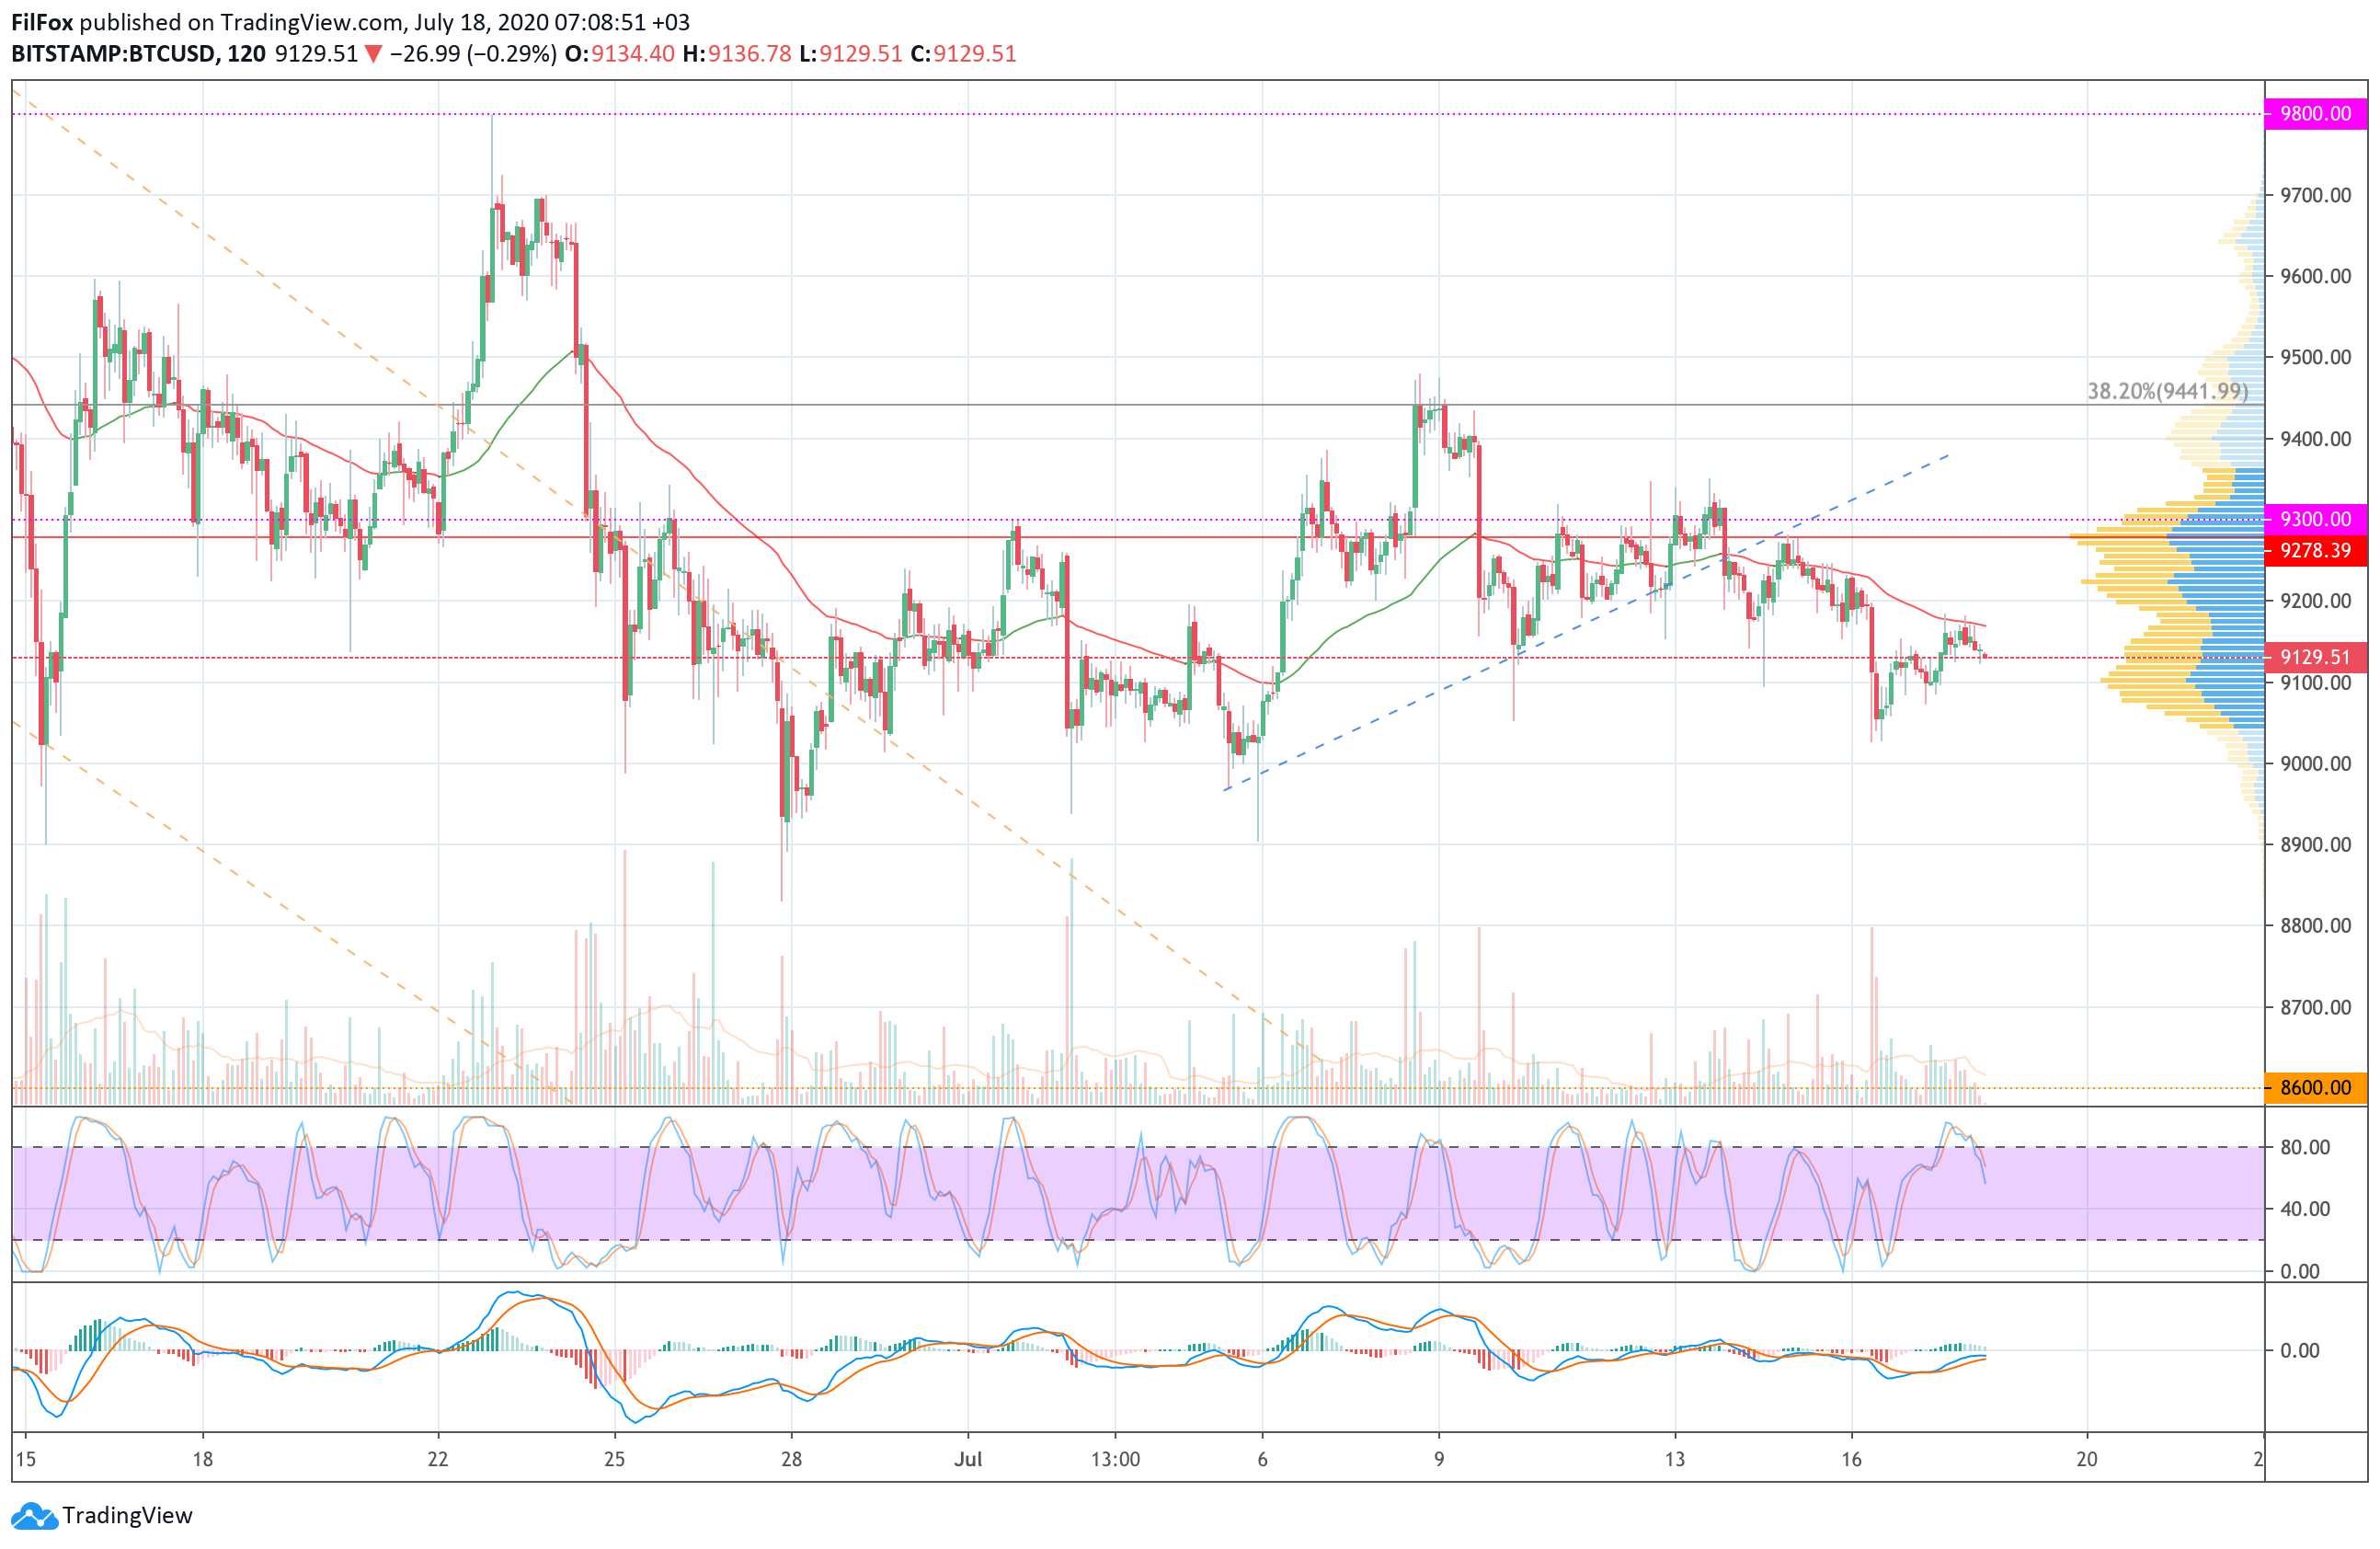 Analysis of prices for Bitcoin, Ethereum, XRP for 07/18/2020